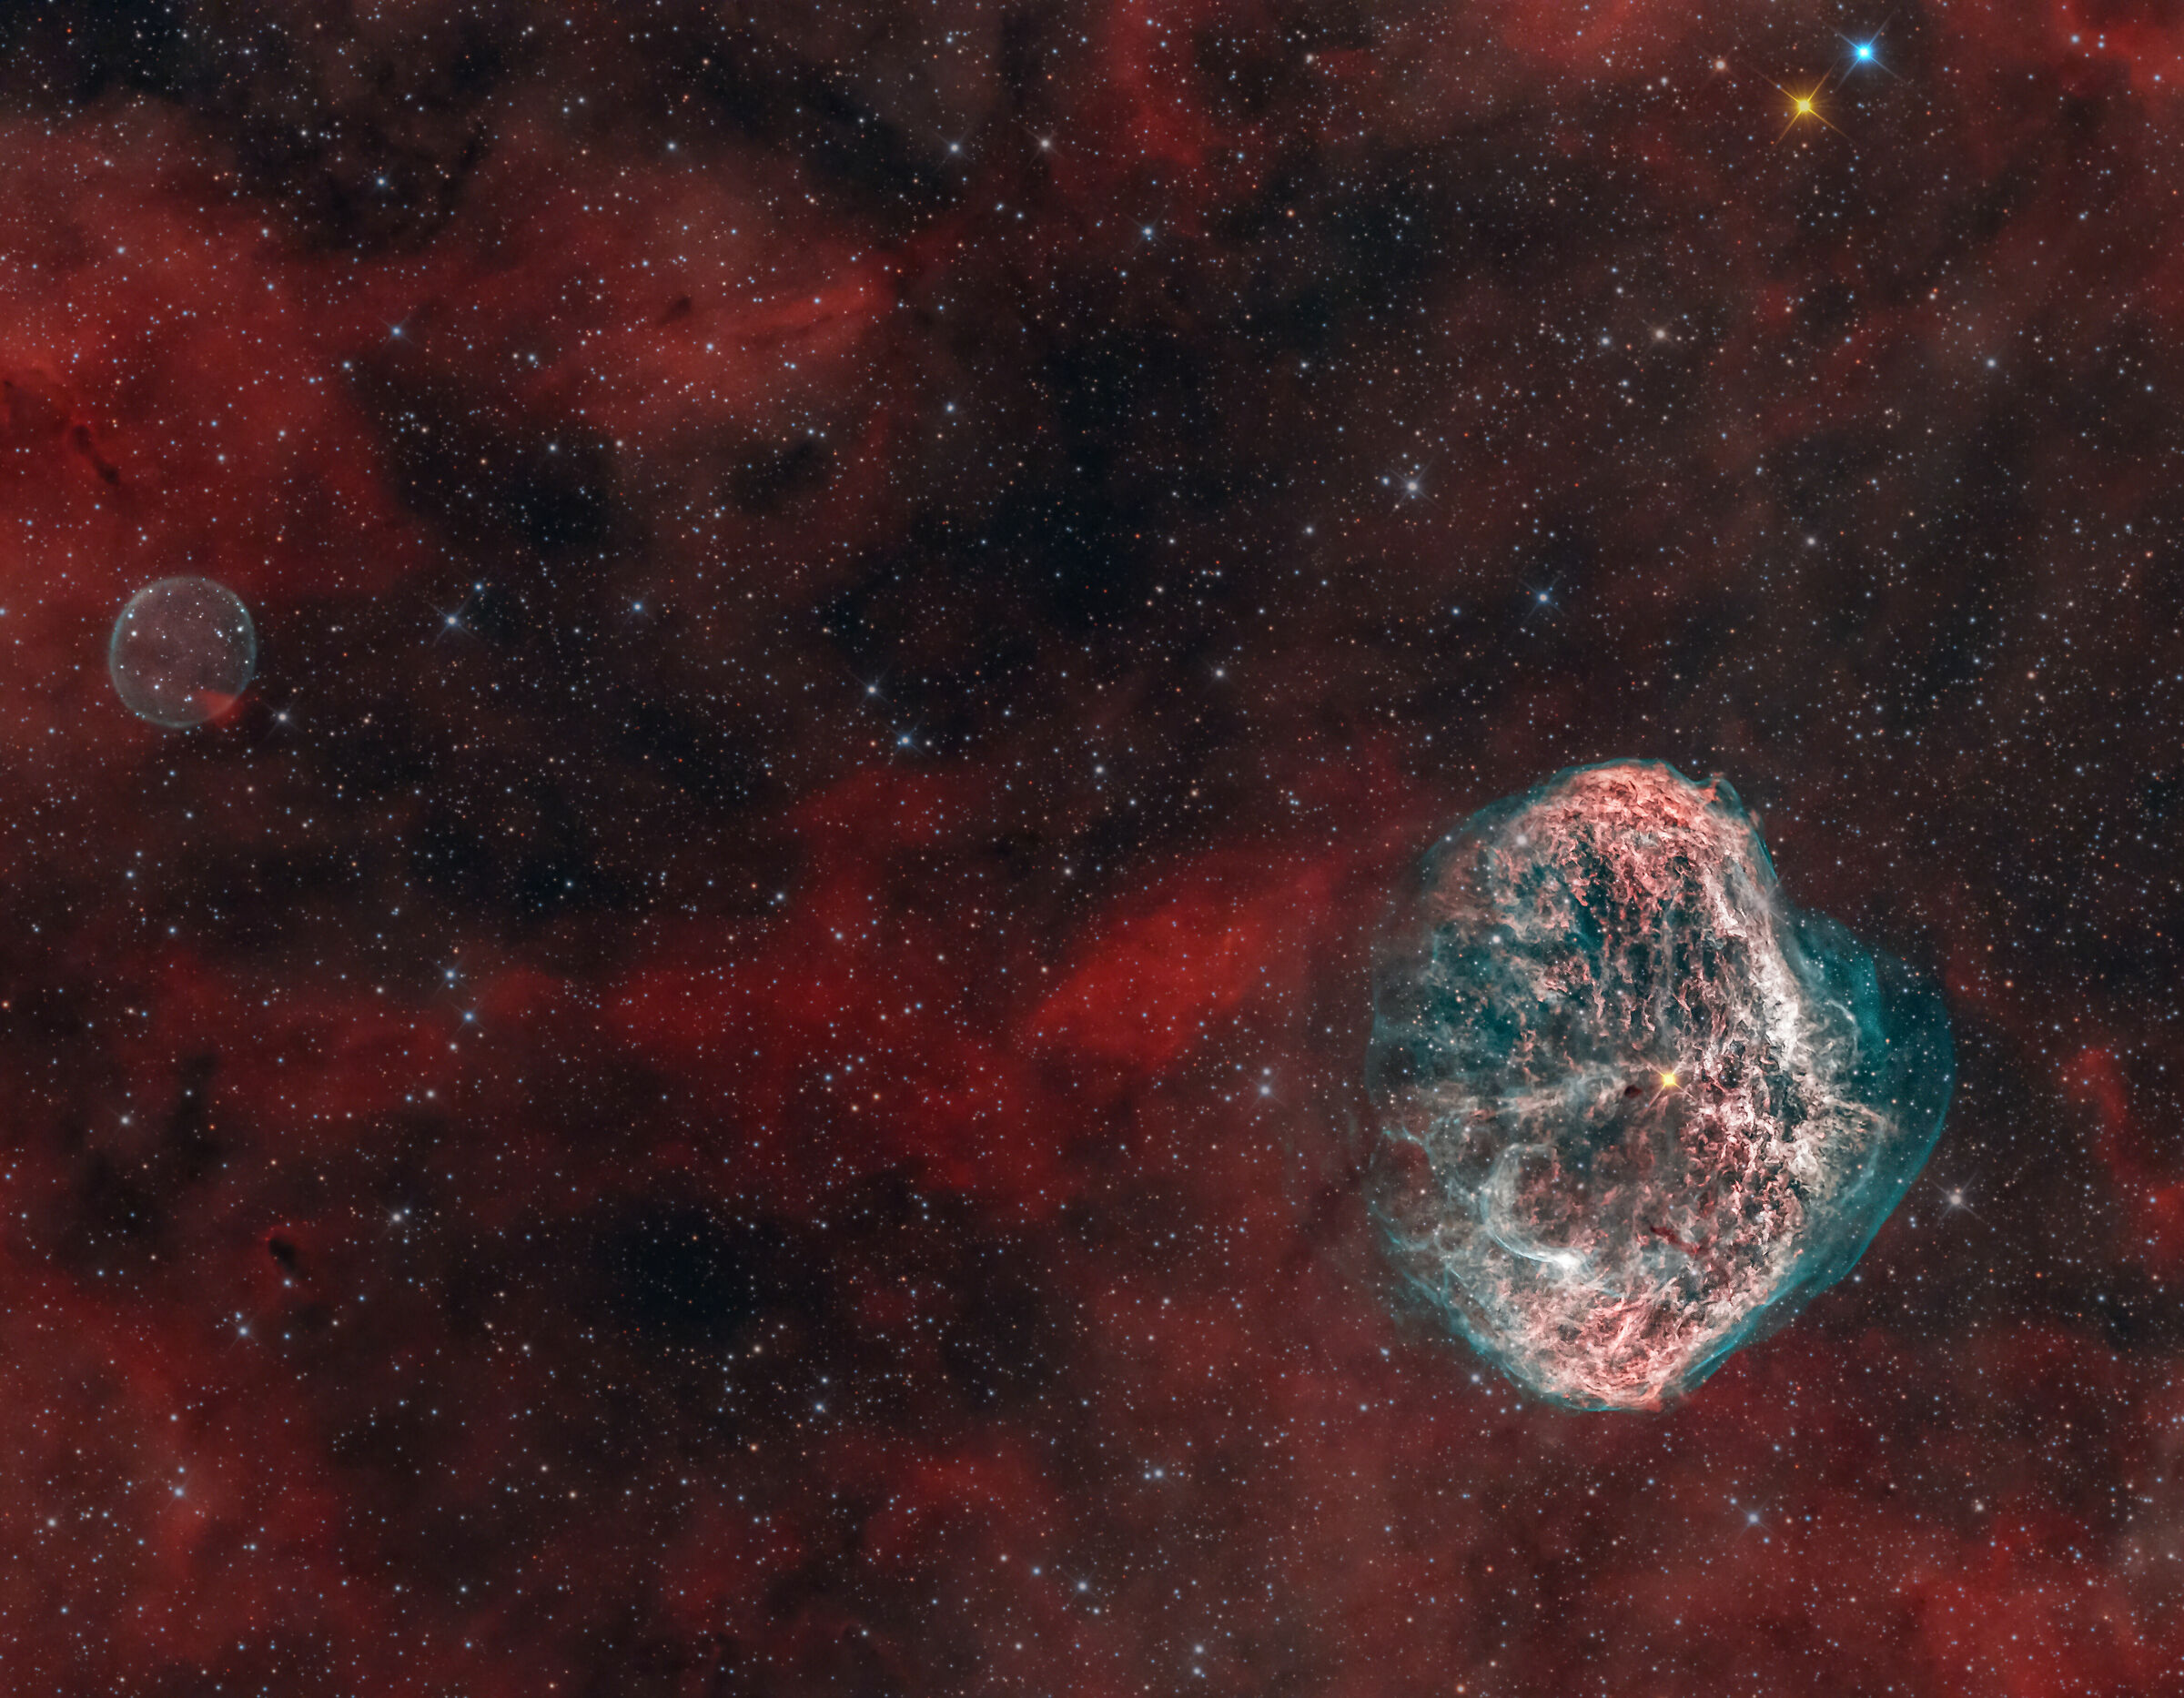 From the Crescent Nebula to the Soap Bubble Nebula...